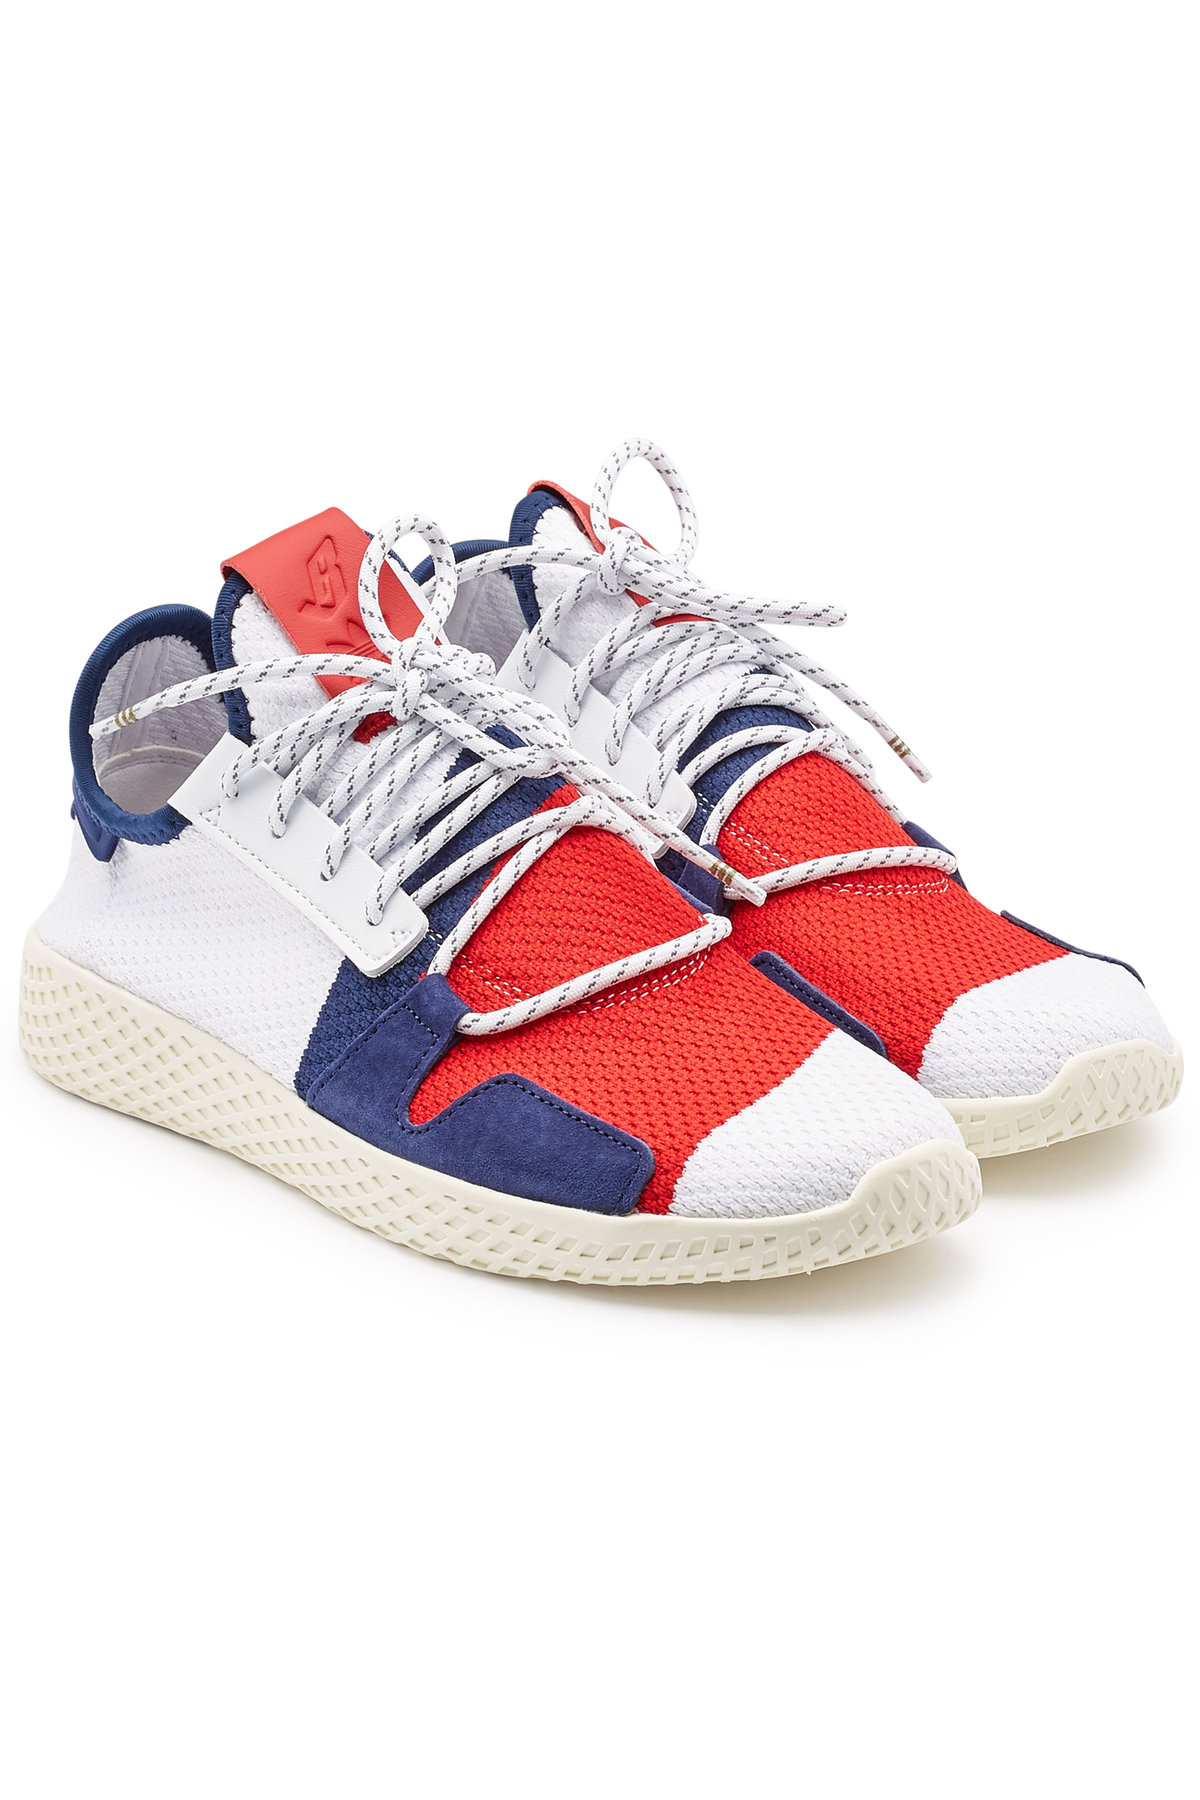 Adidas Originals By Pharrell Williams Bbc Hu V2 Sneakers With Mesh 